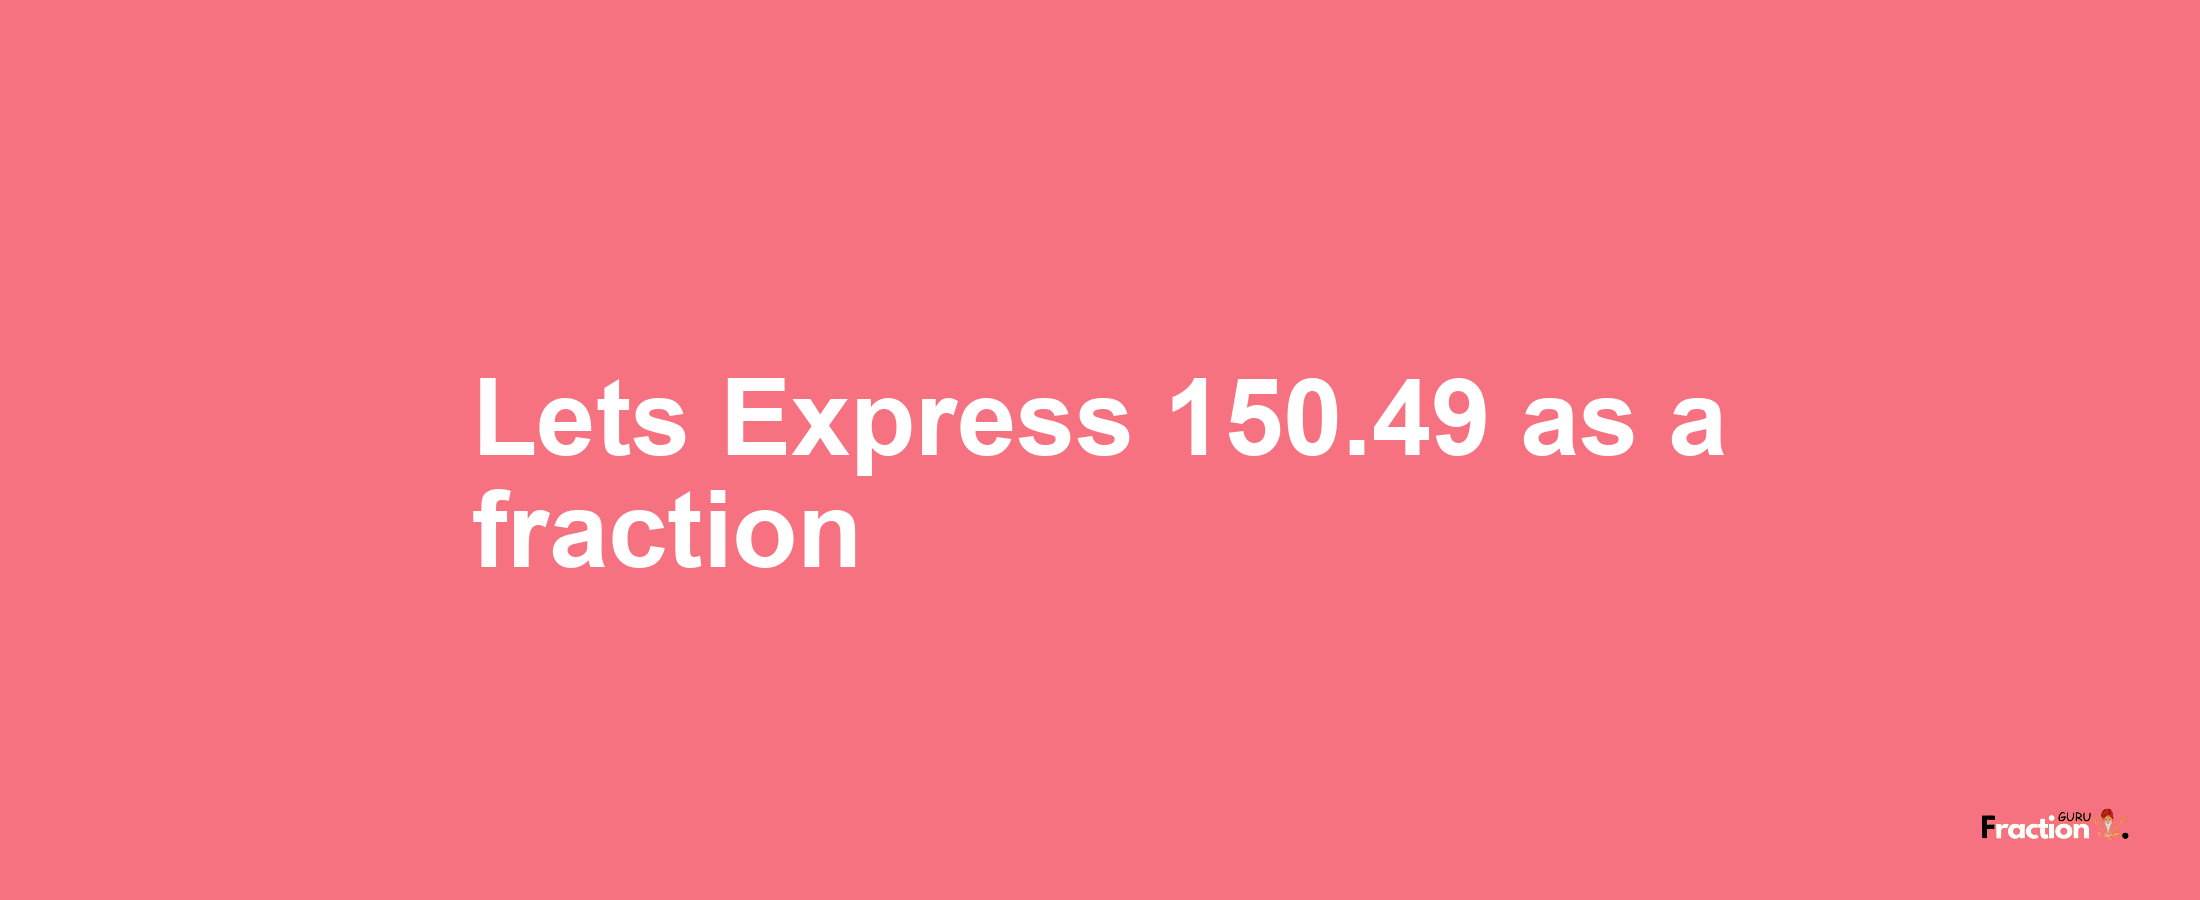 Lets Express 150.49 as afraction